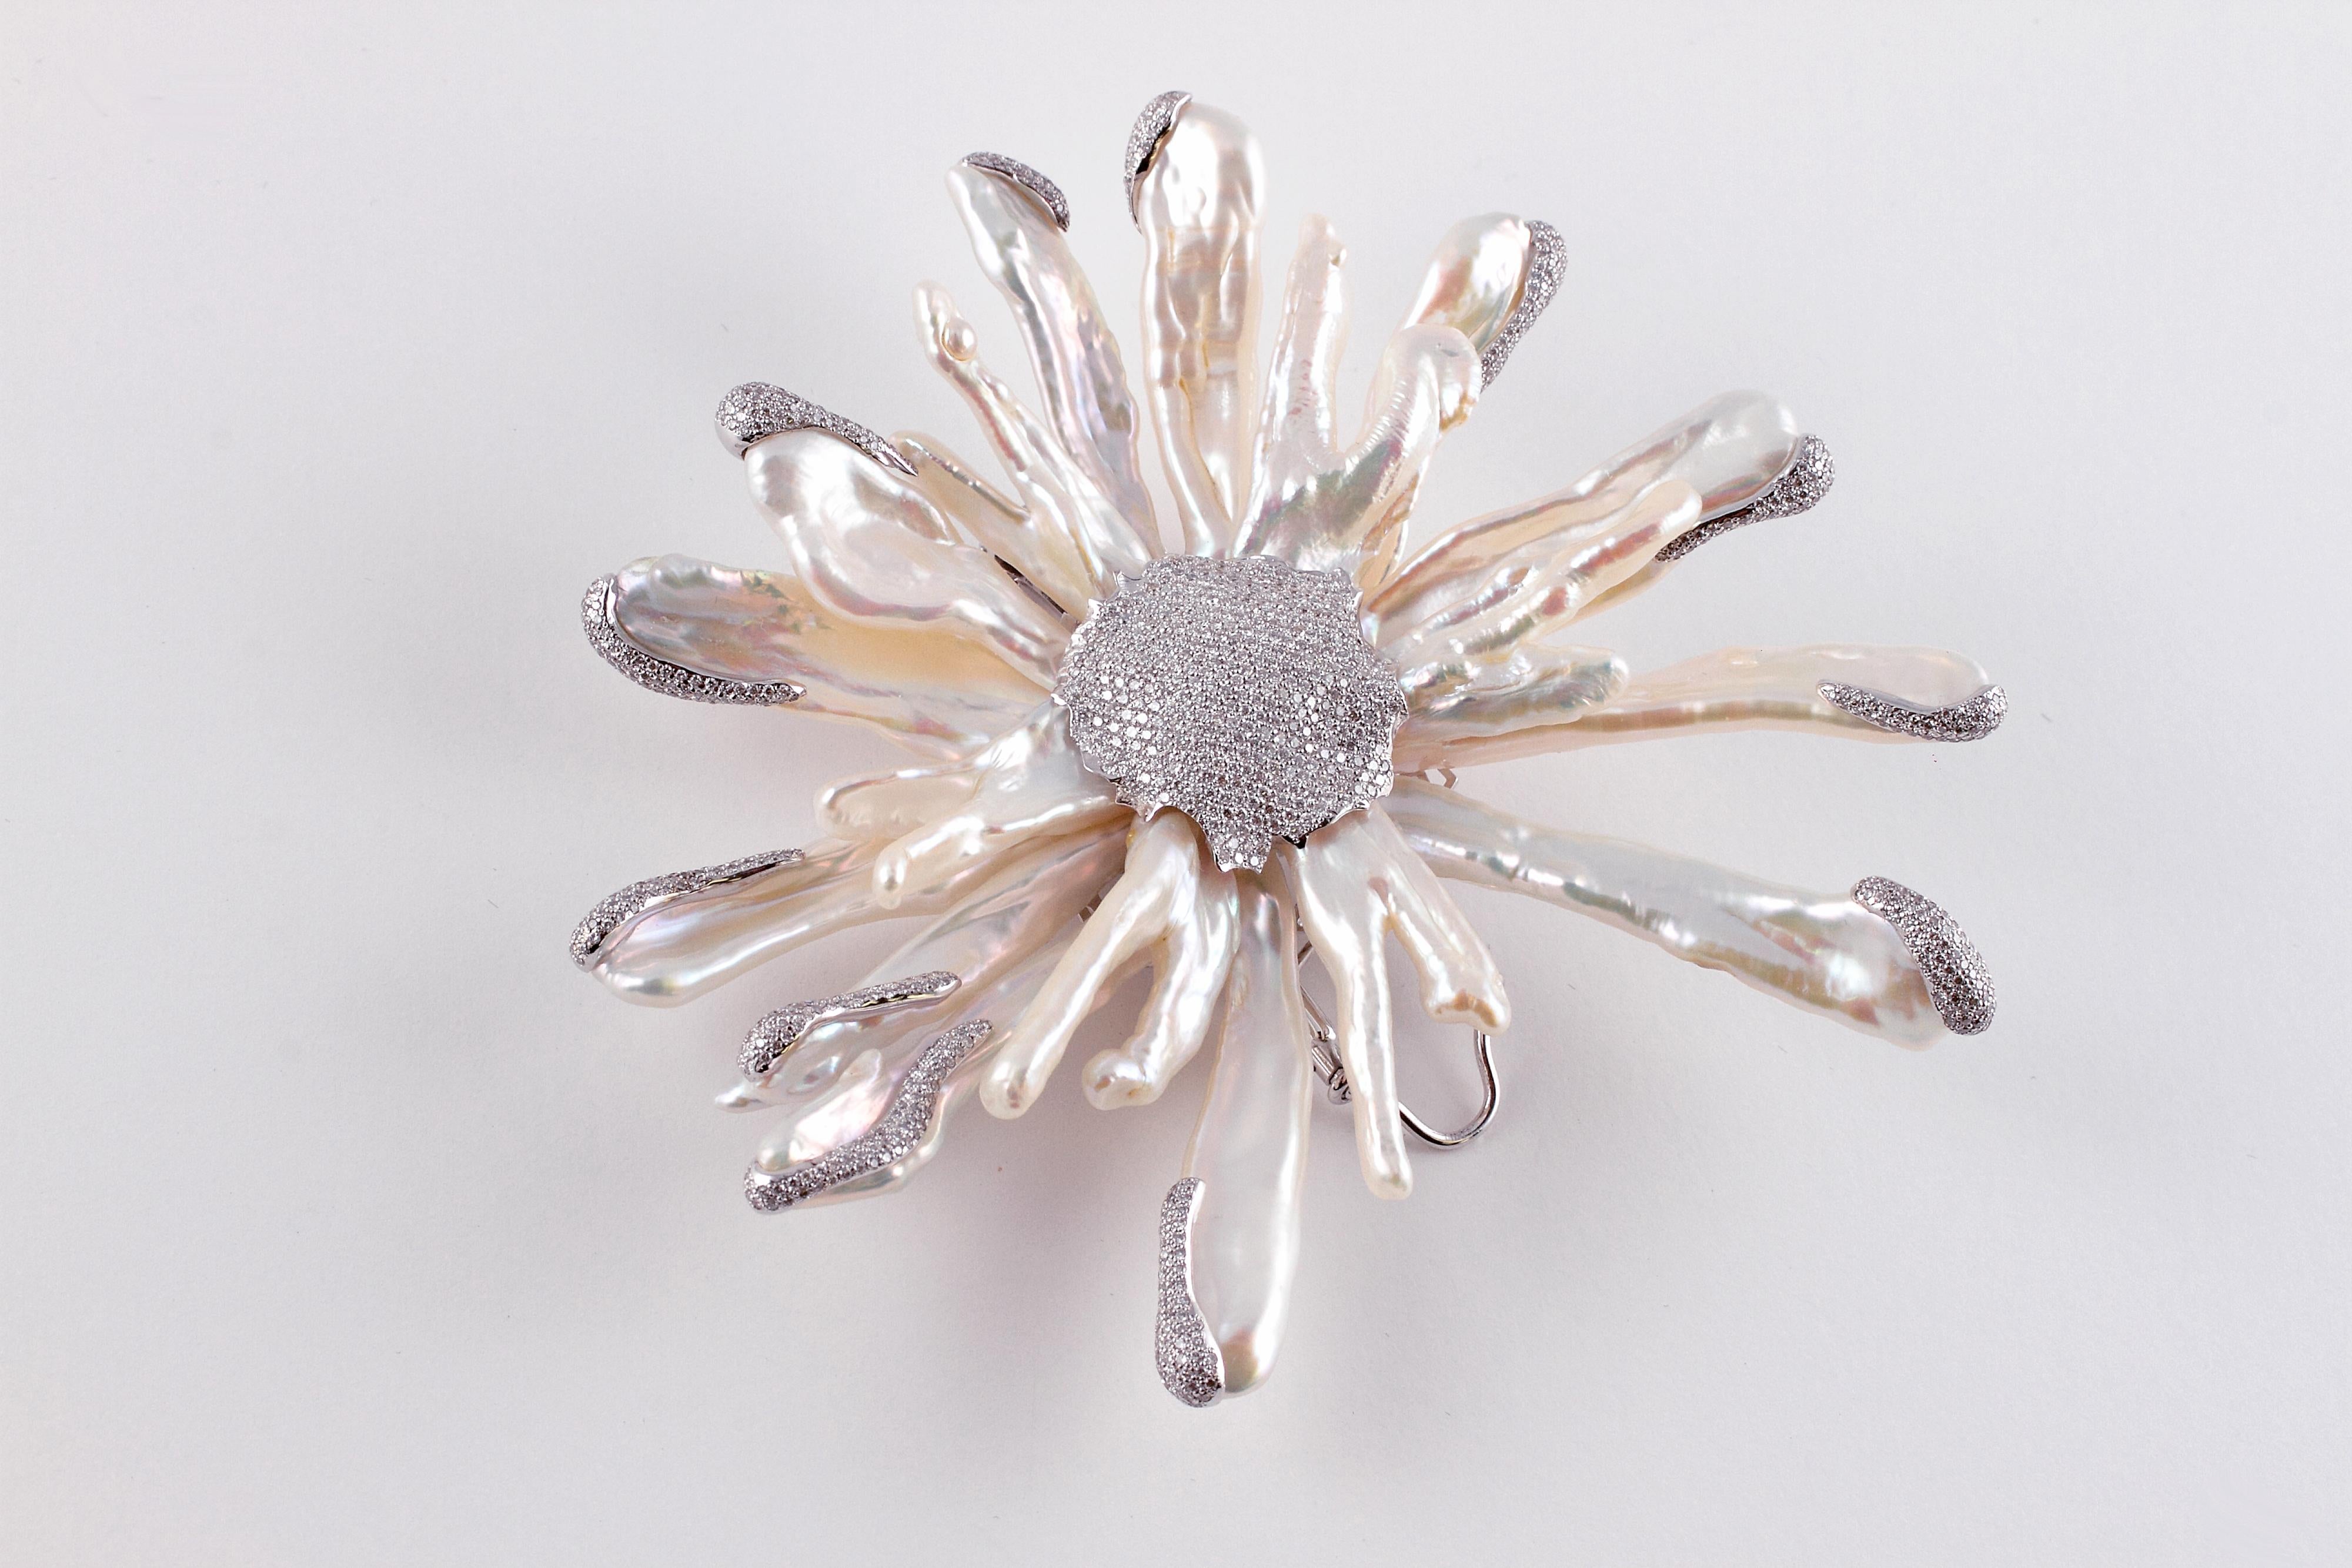 A striking 18 Karat White Gold Flower Brooch by Yvel of Israel with Keshi Pearls and set with 5.72 carats of diamonds.  The pearls have a white body color, excellent to moderate luster, and range from approximately 20 mm to 50 mm in length.  The